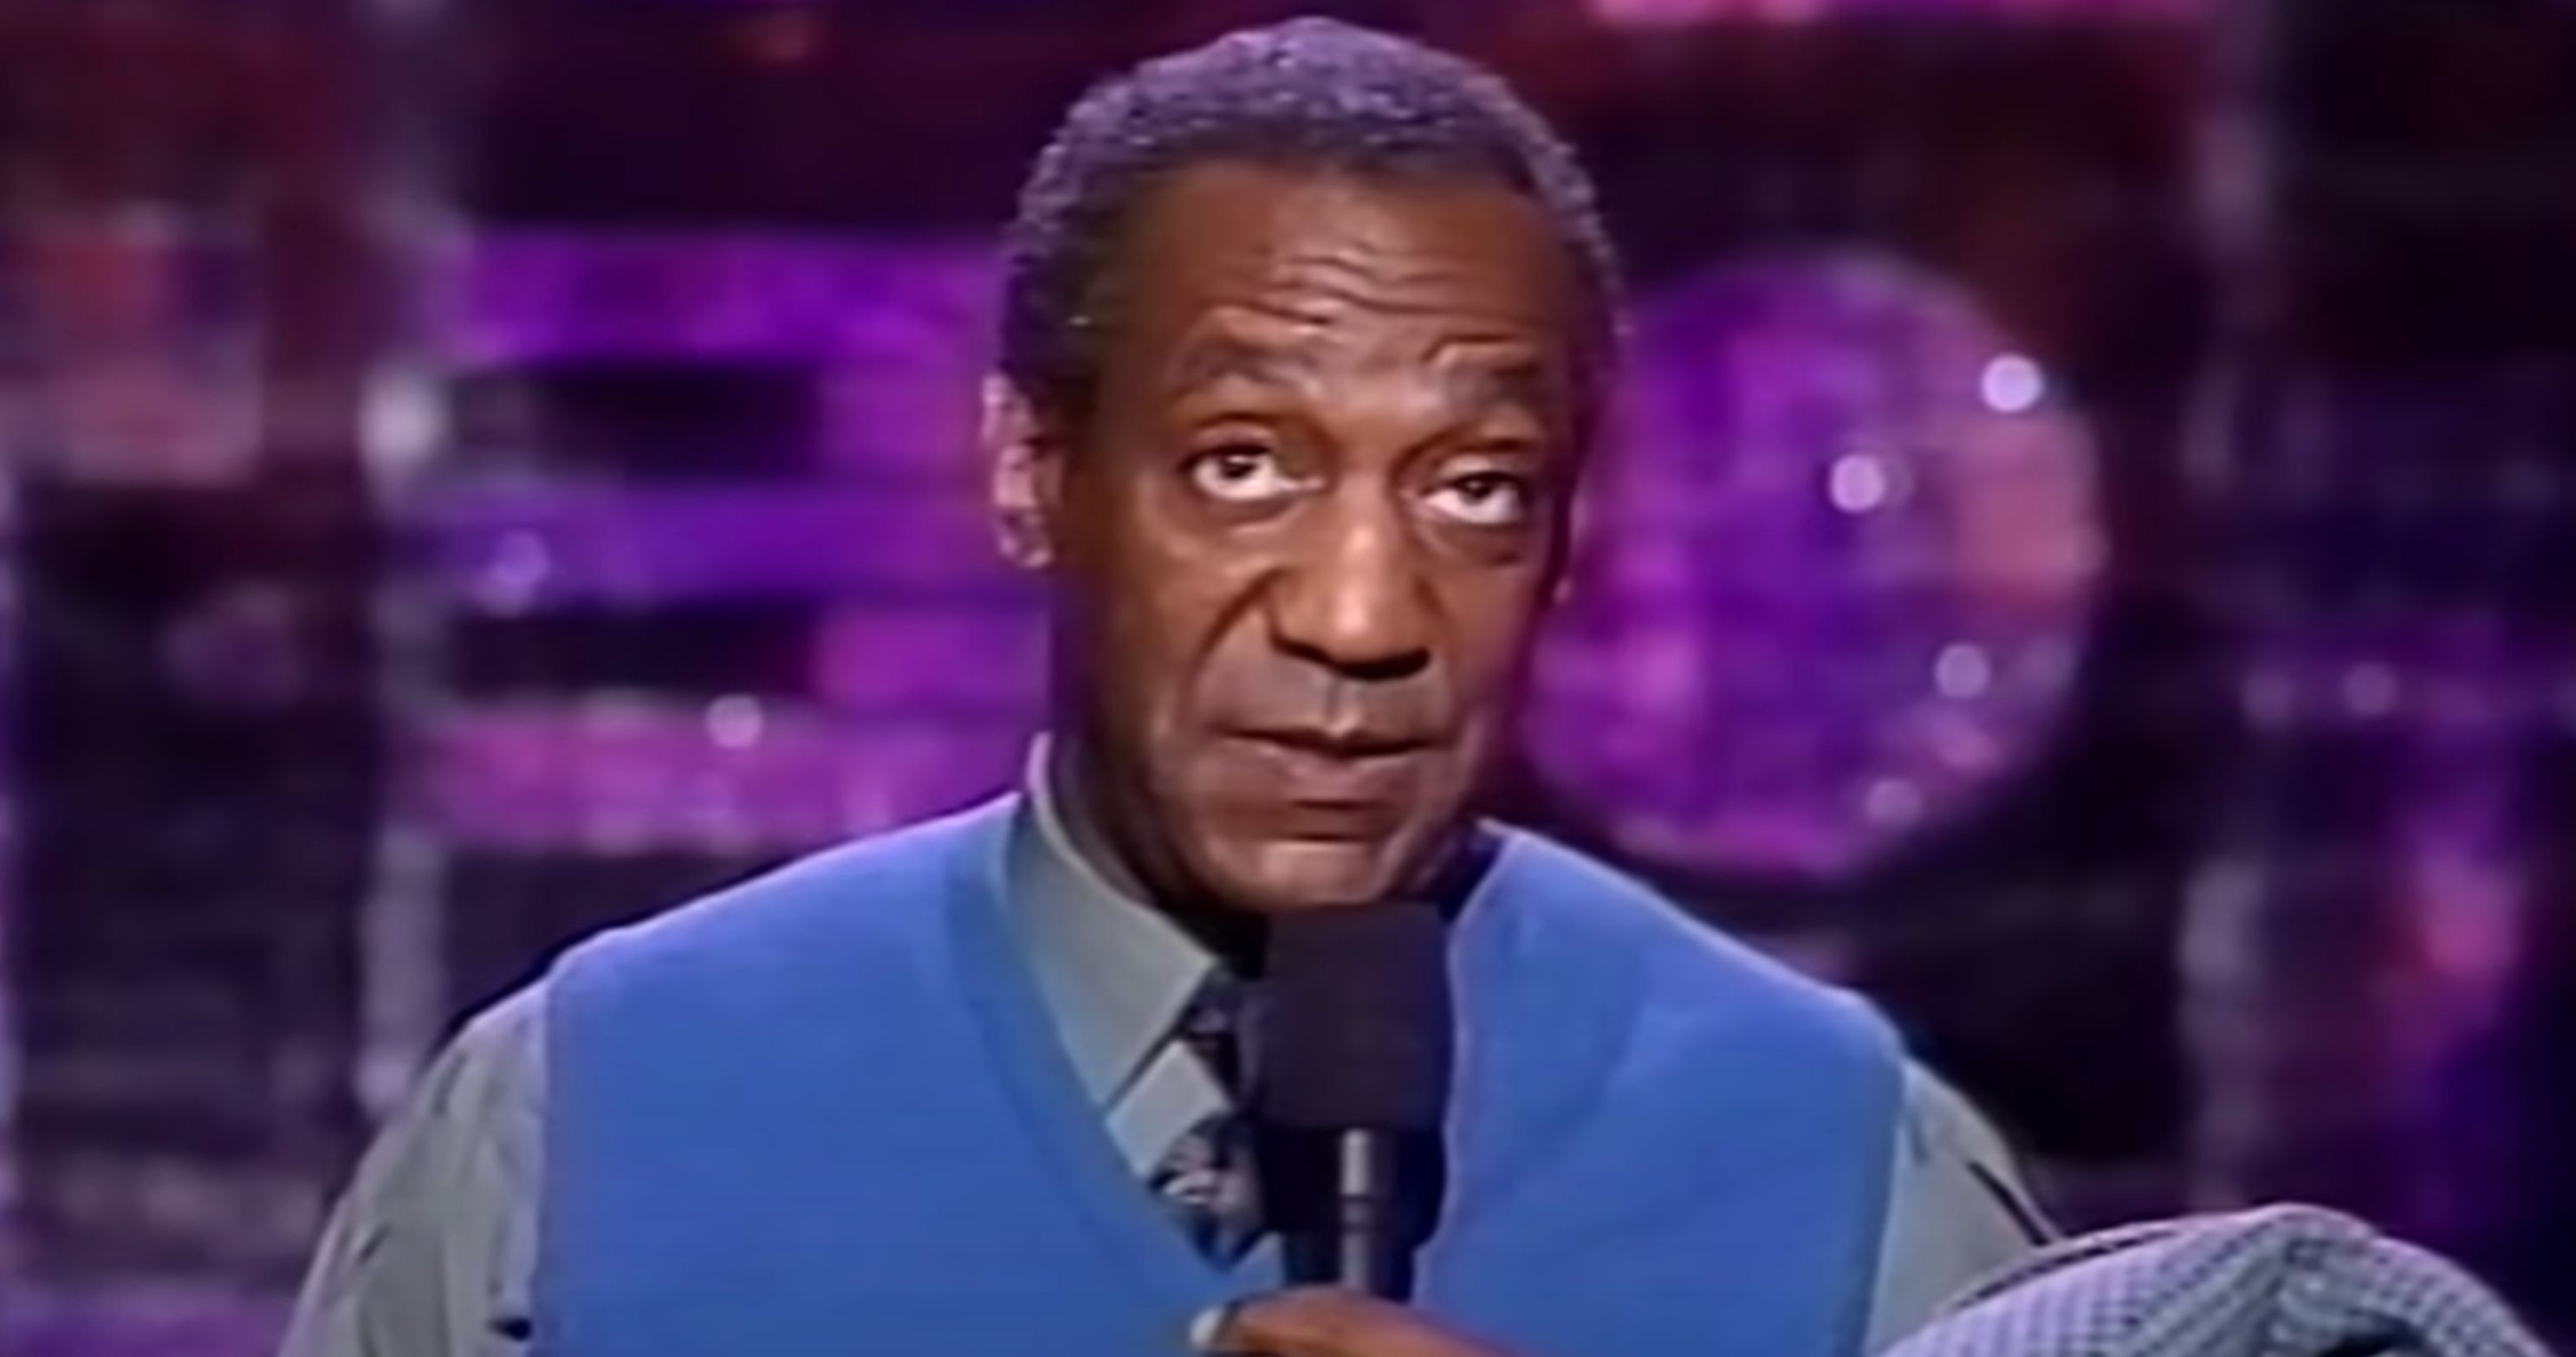 Bill Cosby Is Planning a New Comedy Tour According to His Rep